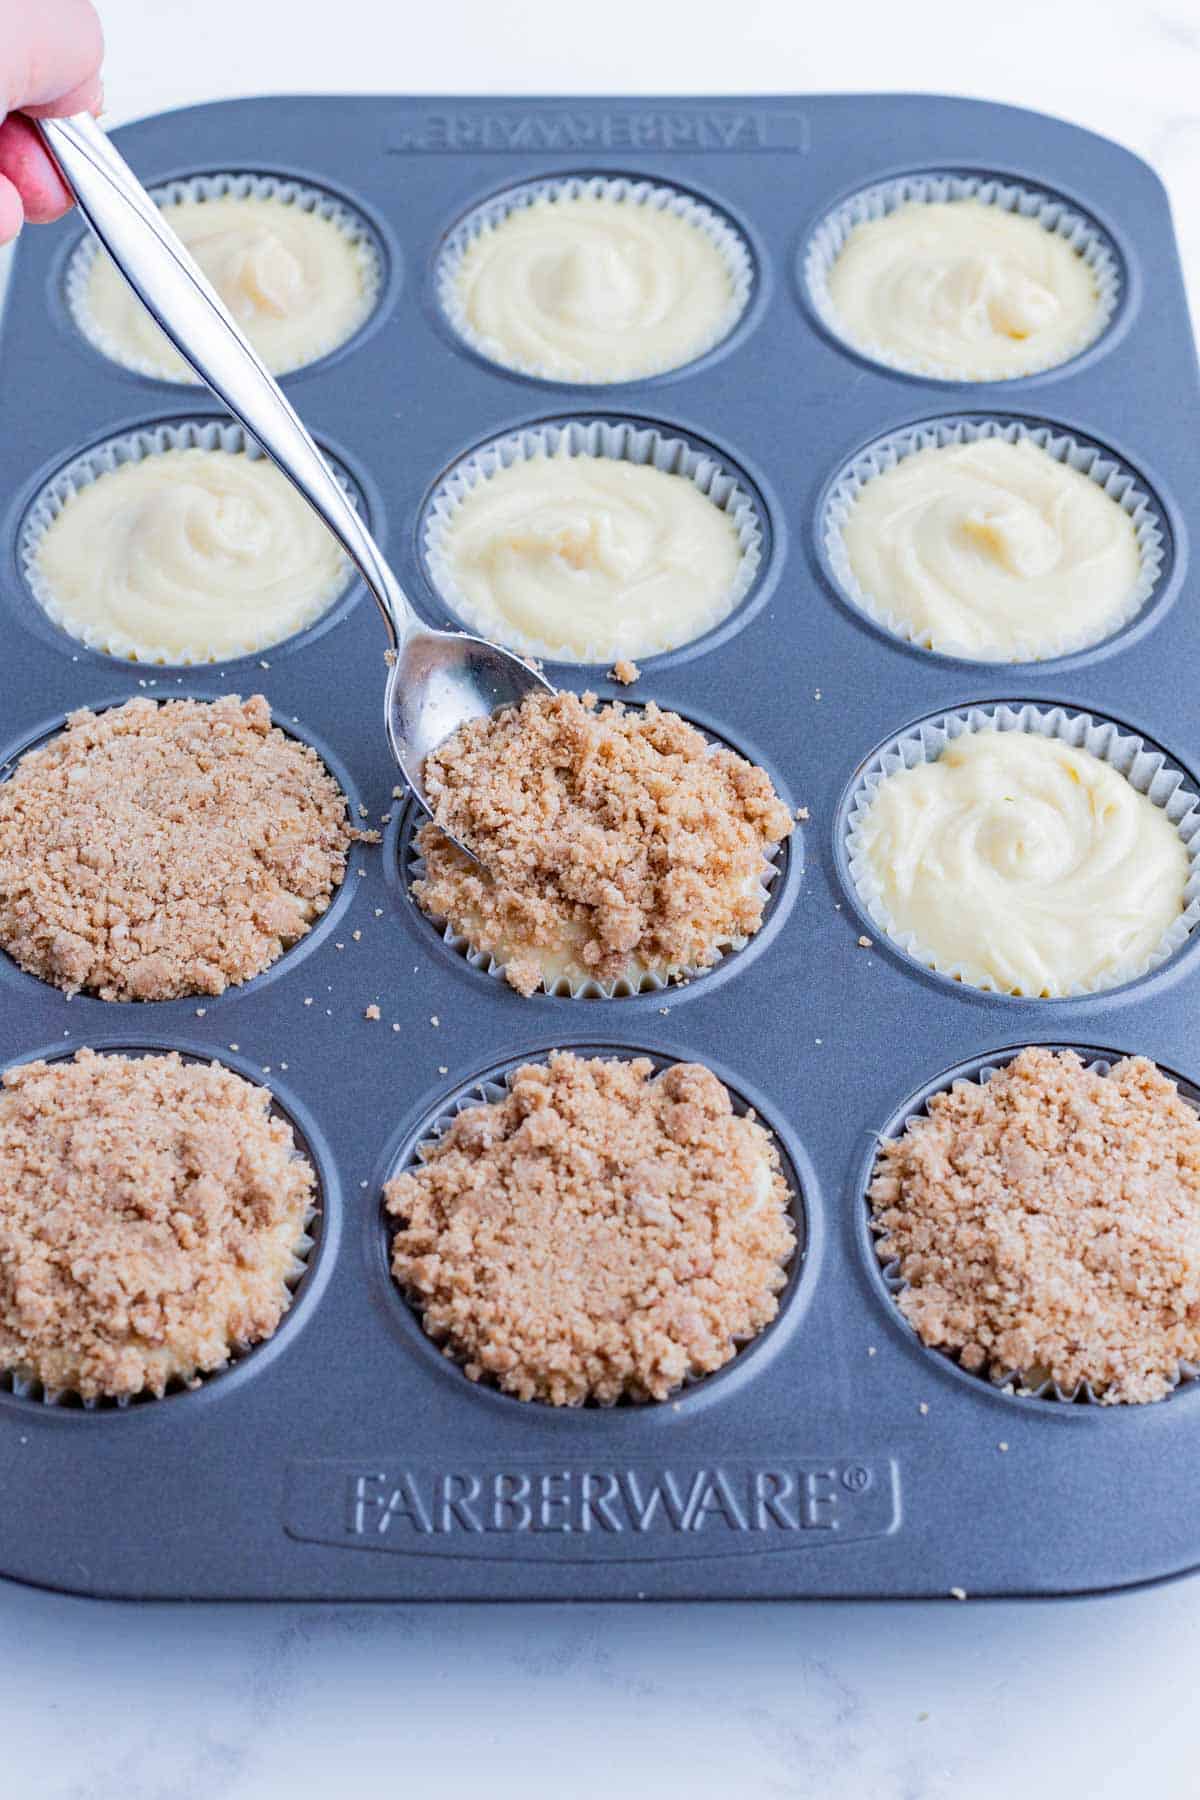 Each cupcake is topped with cinnamon streusel.